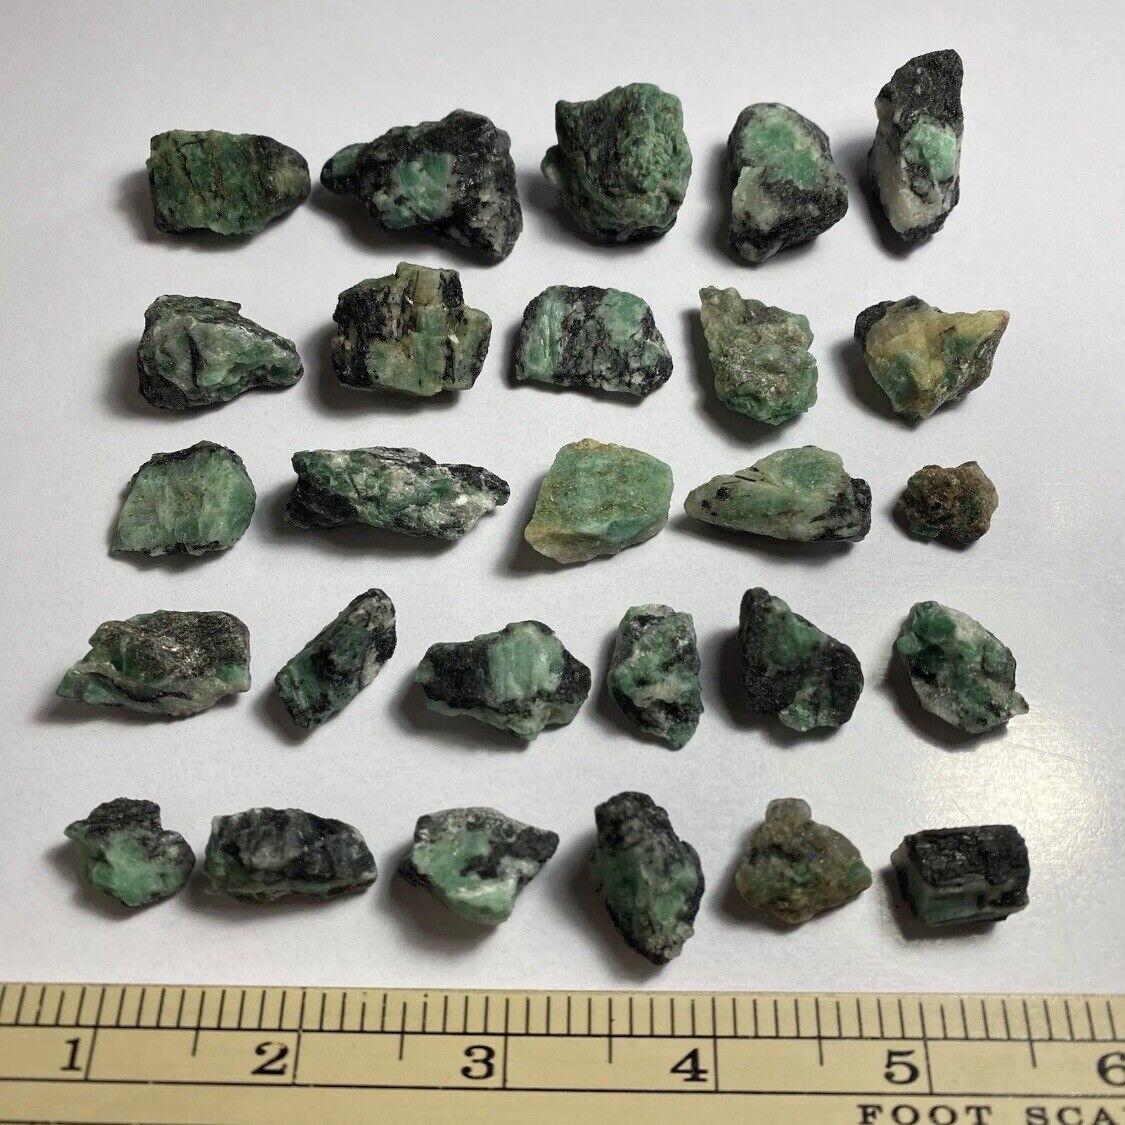 200gm rough Emerald from Pakistan